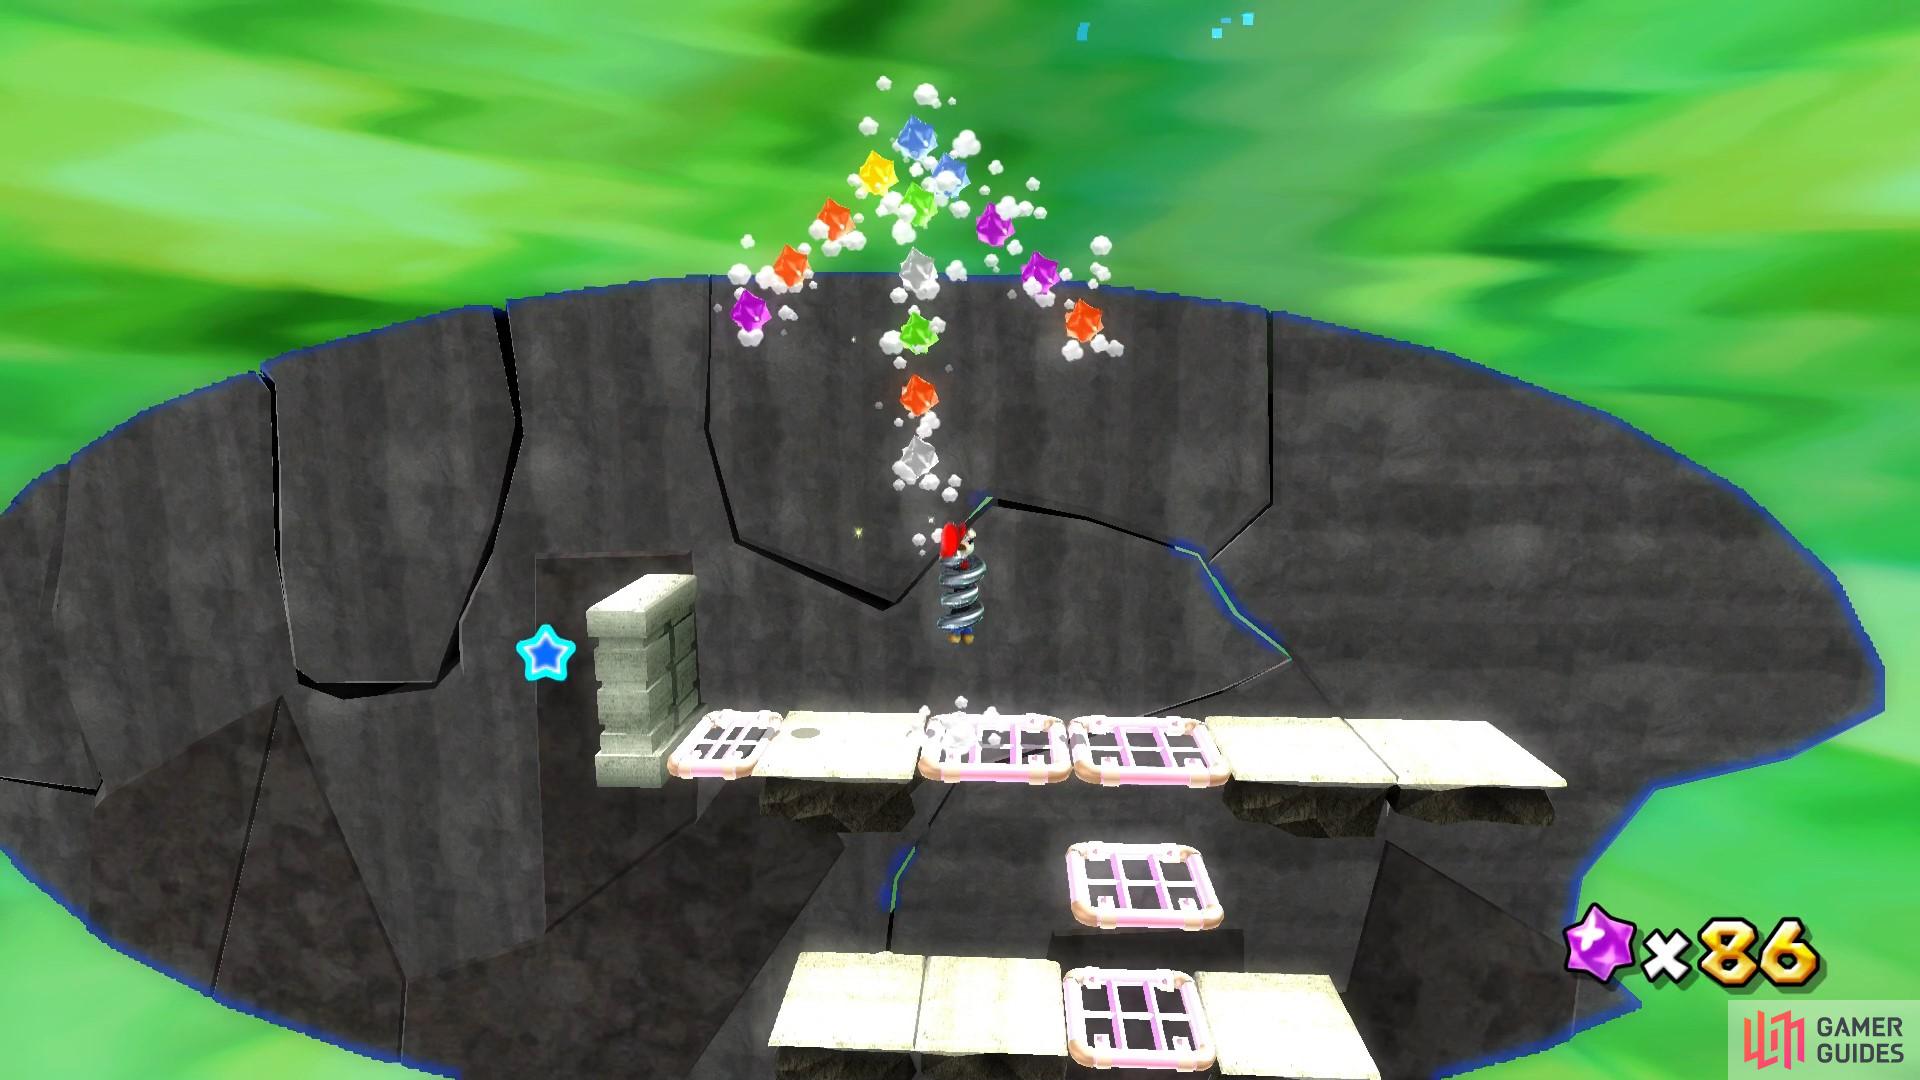 Spring Mario will need to perform lots of high jumps in this section of the level.